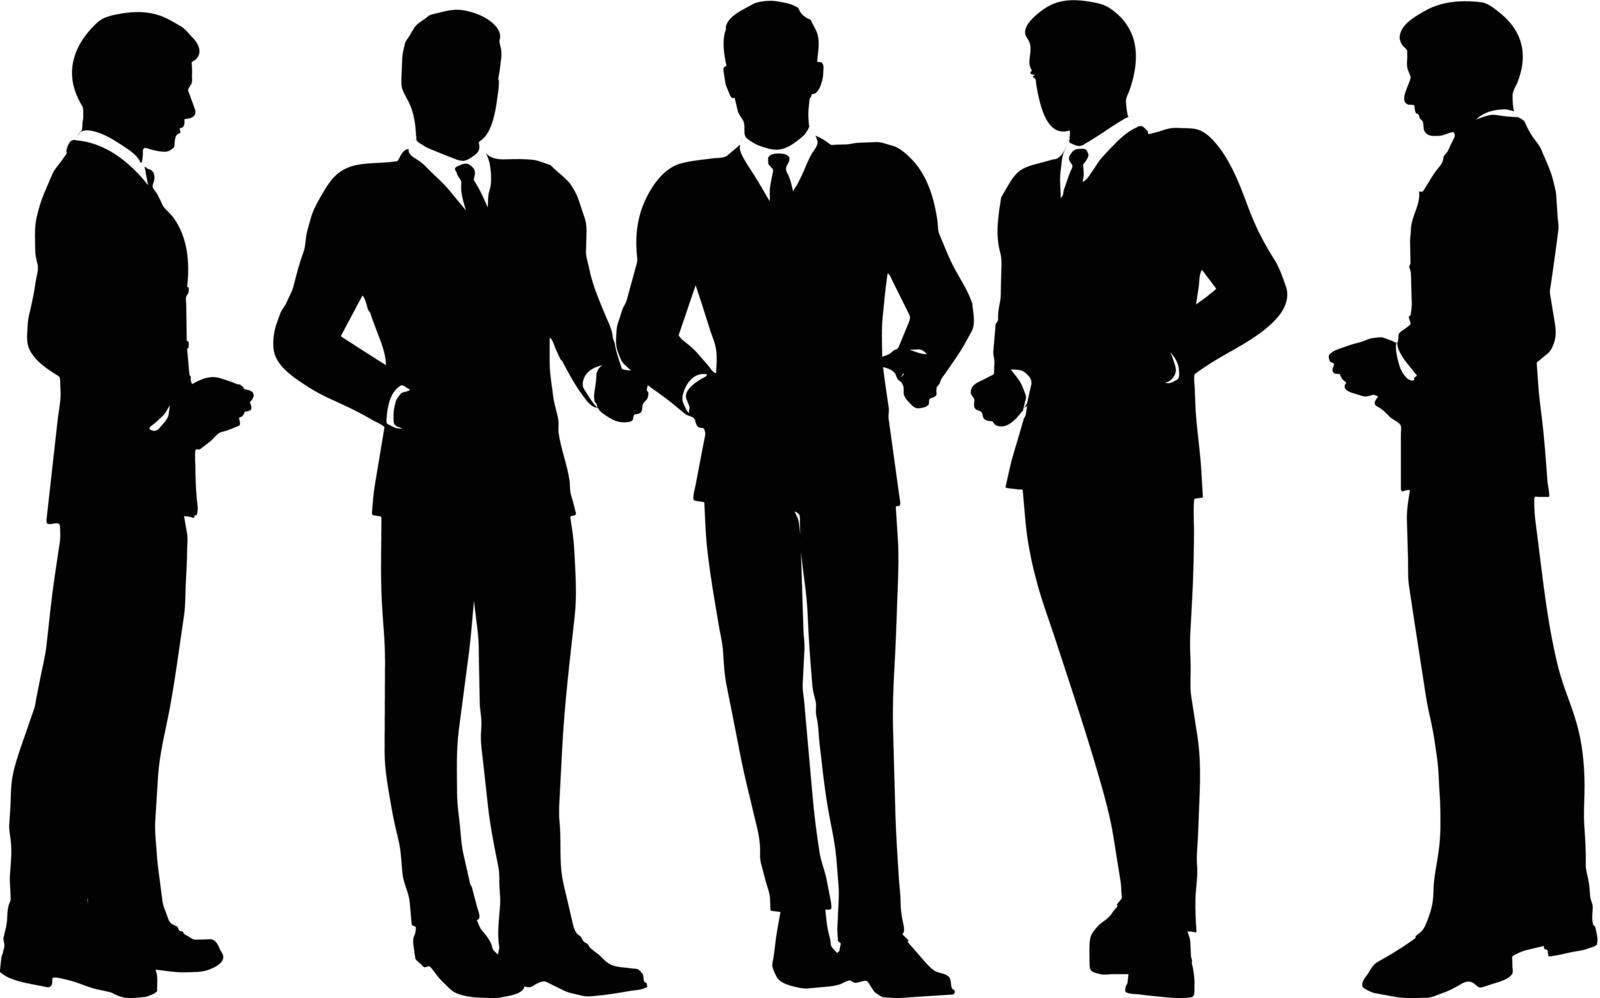 business people standing silhouette by Istanbul2009